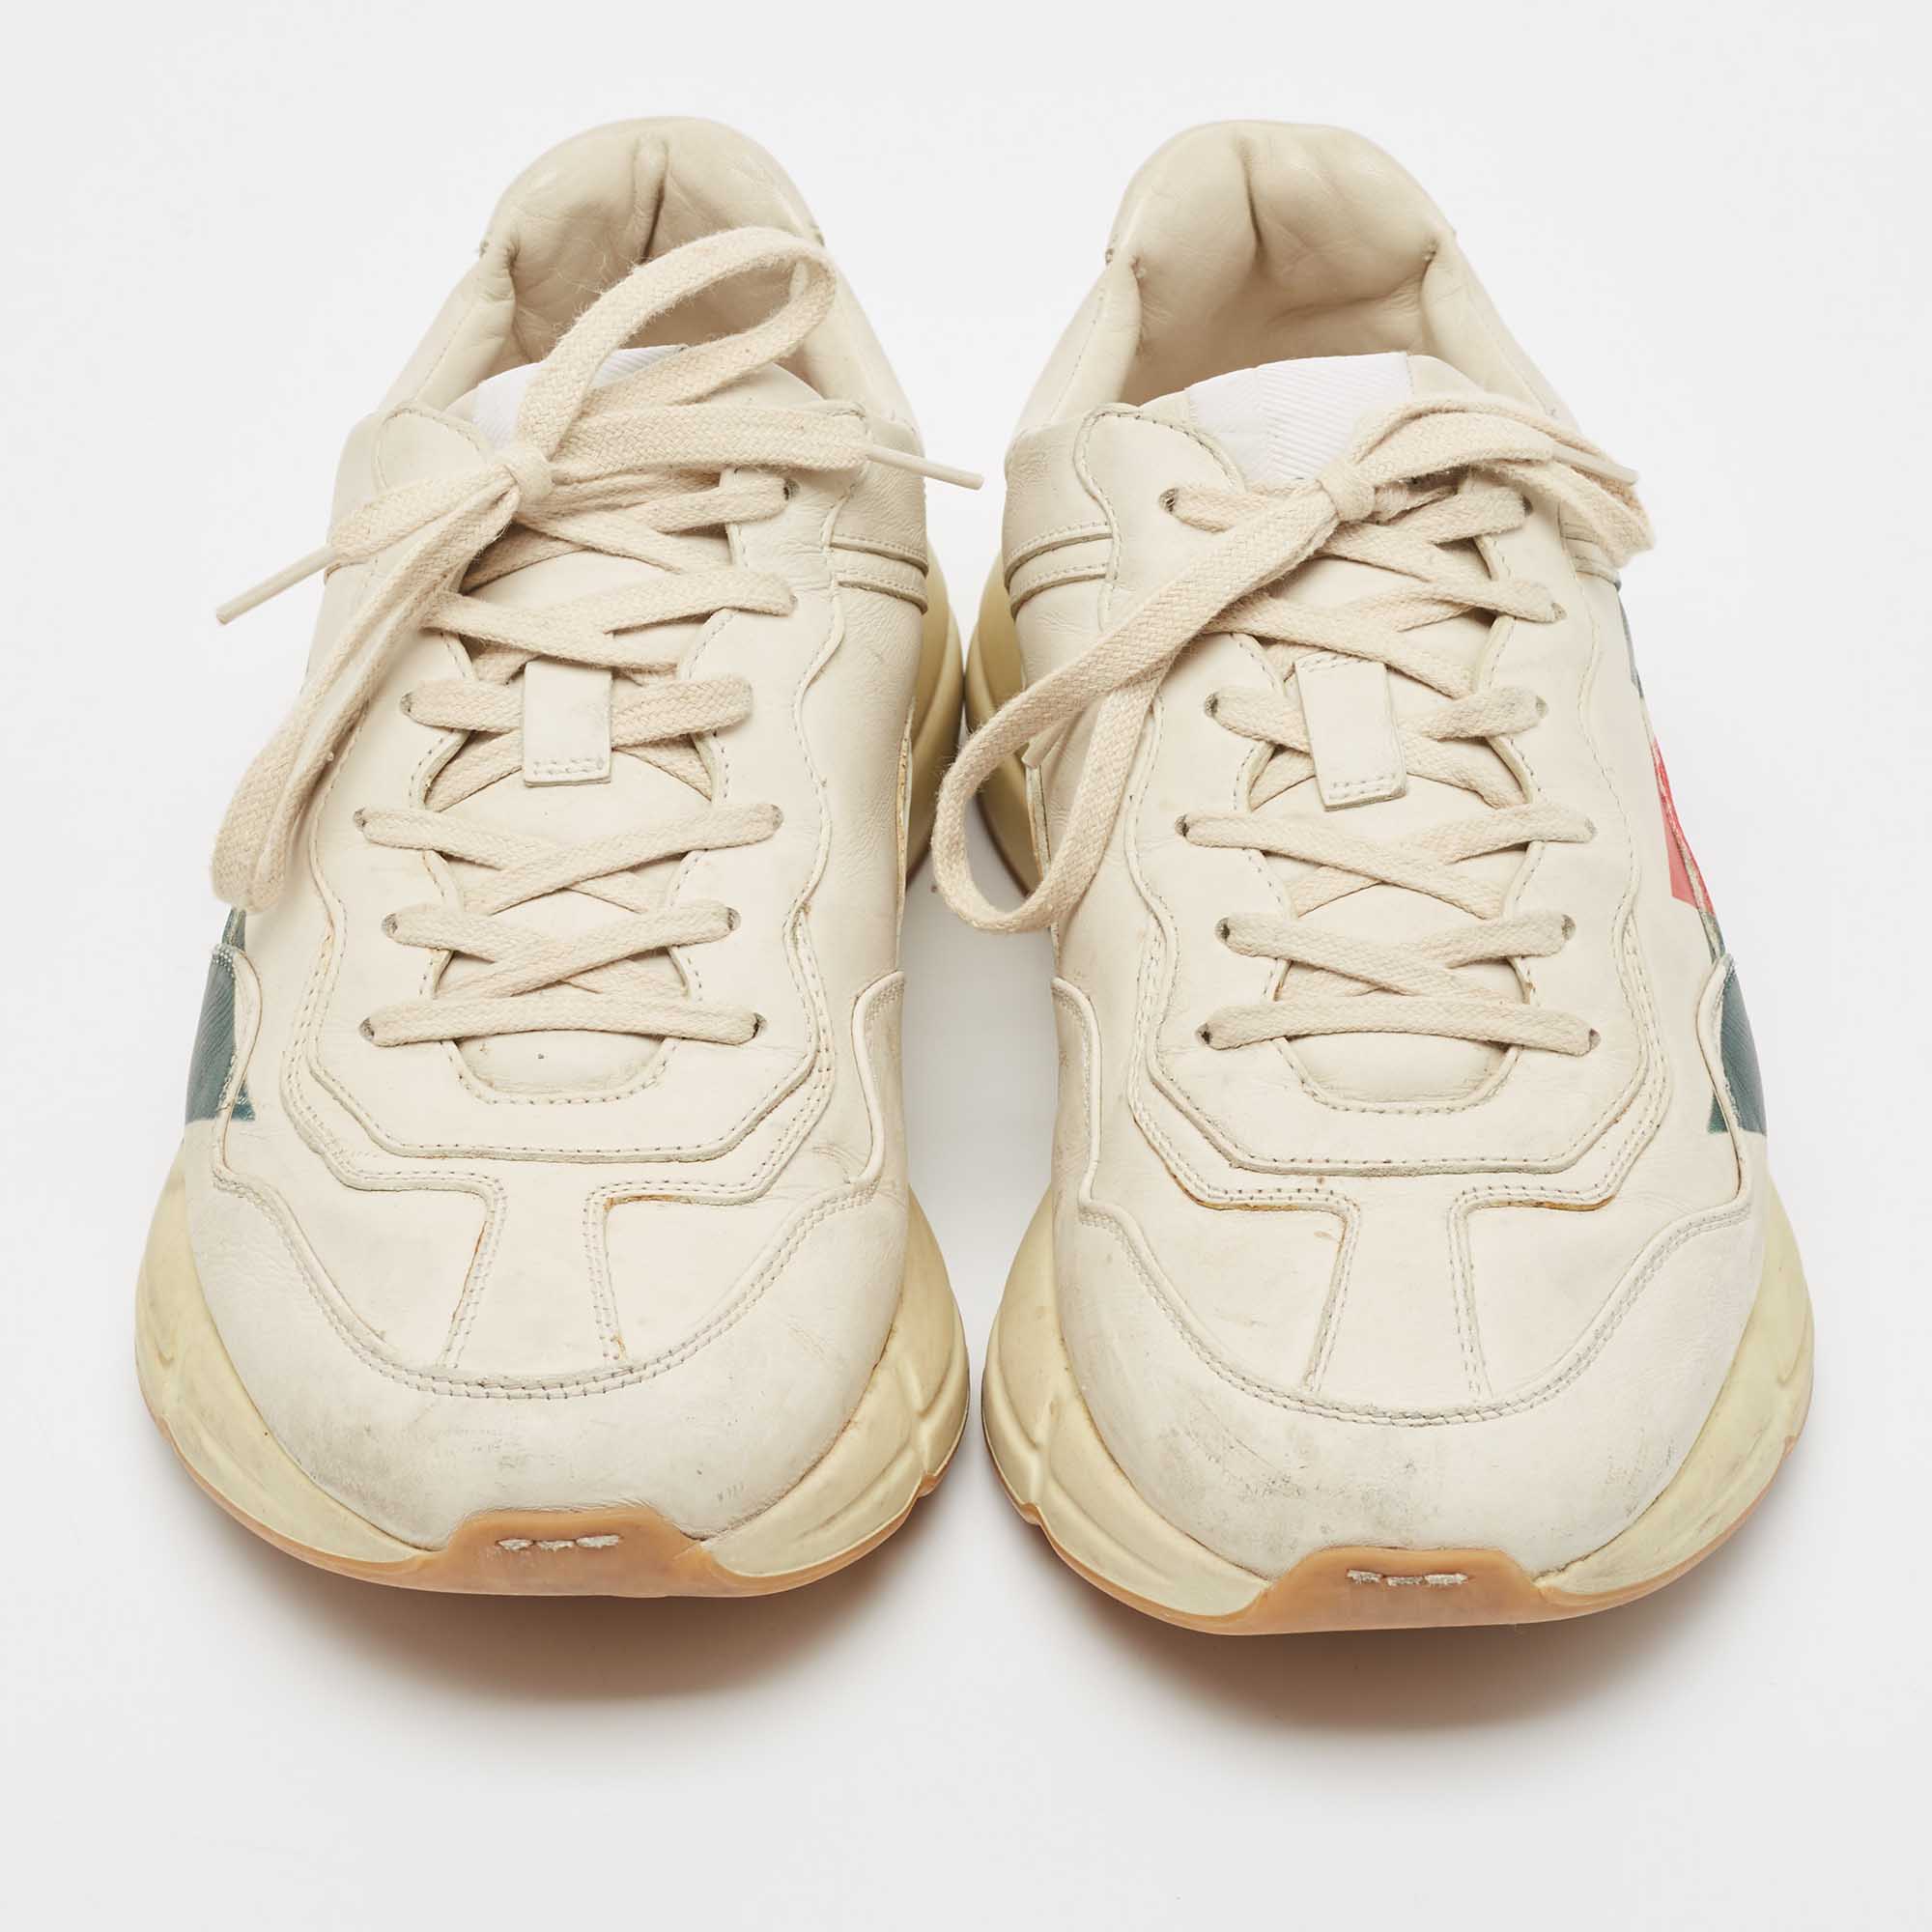 Gucci Cream Leather Rhyton Low Top Sneakers Size 43